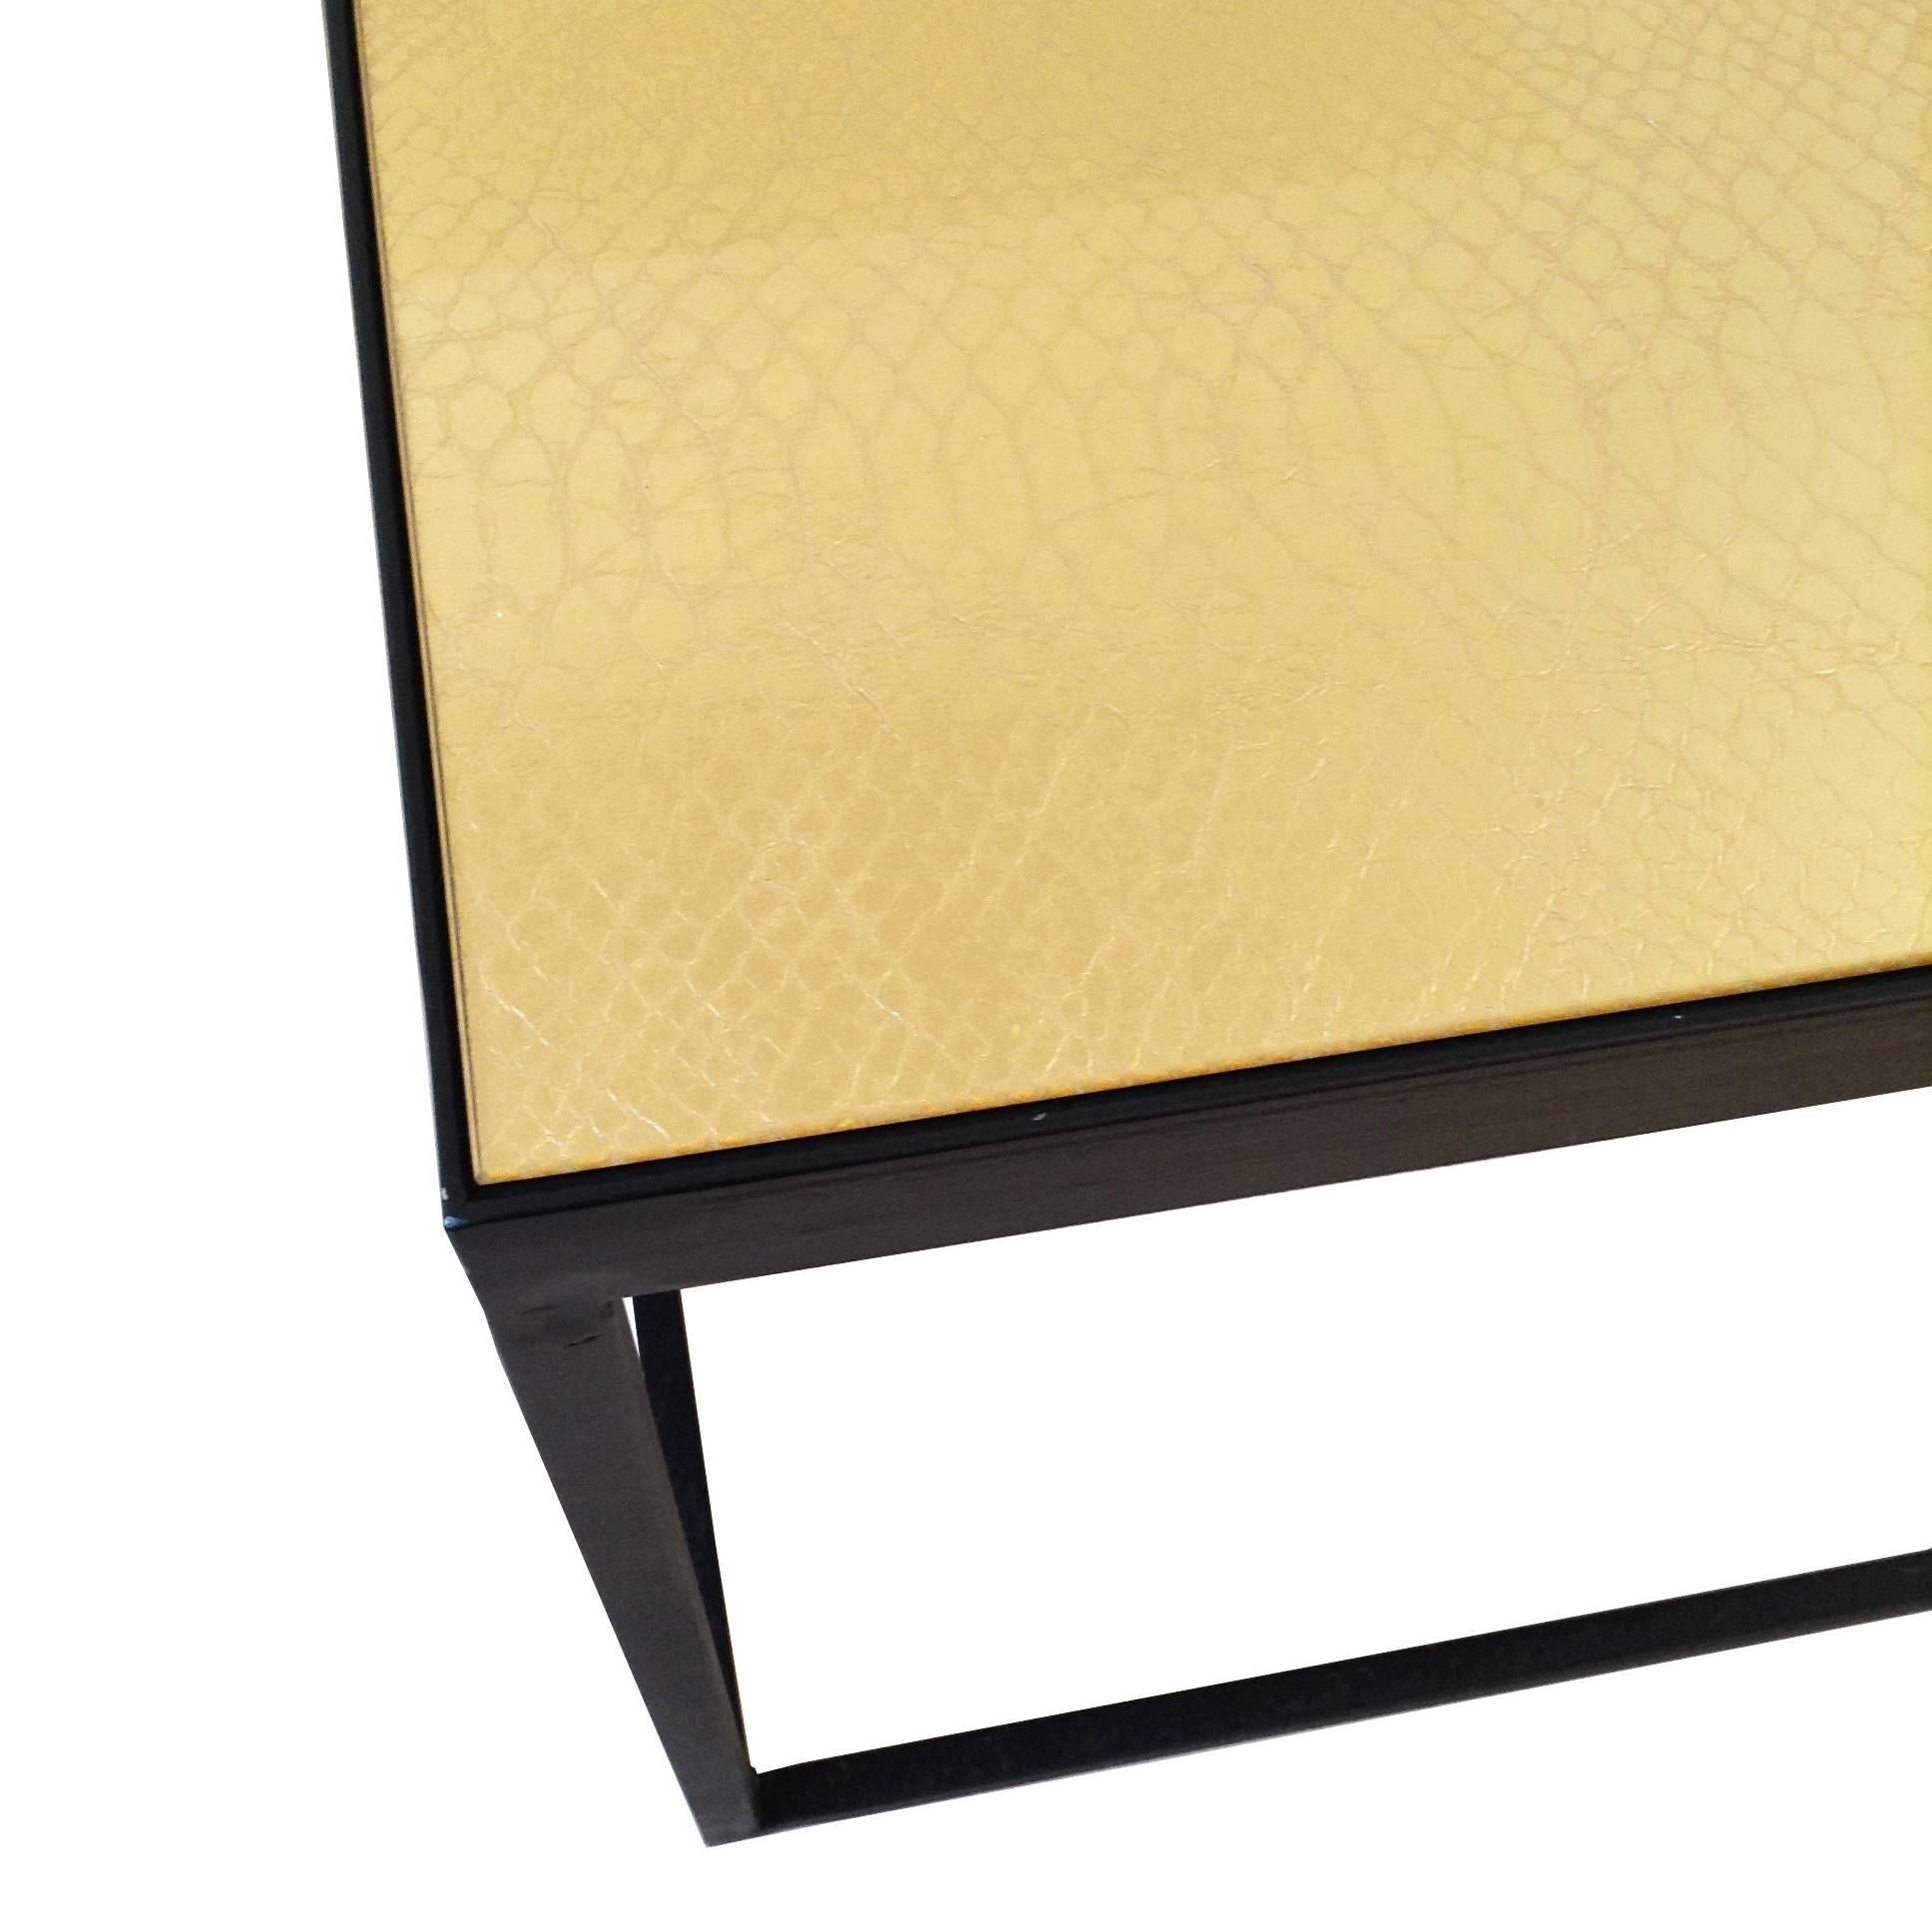 Matt black frame side tables with gold snakeskin print leather and glass top.

Currently on sale as ex-display:

1 x W50 x D50 x H45 cm